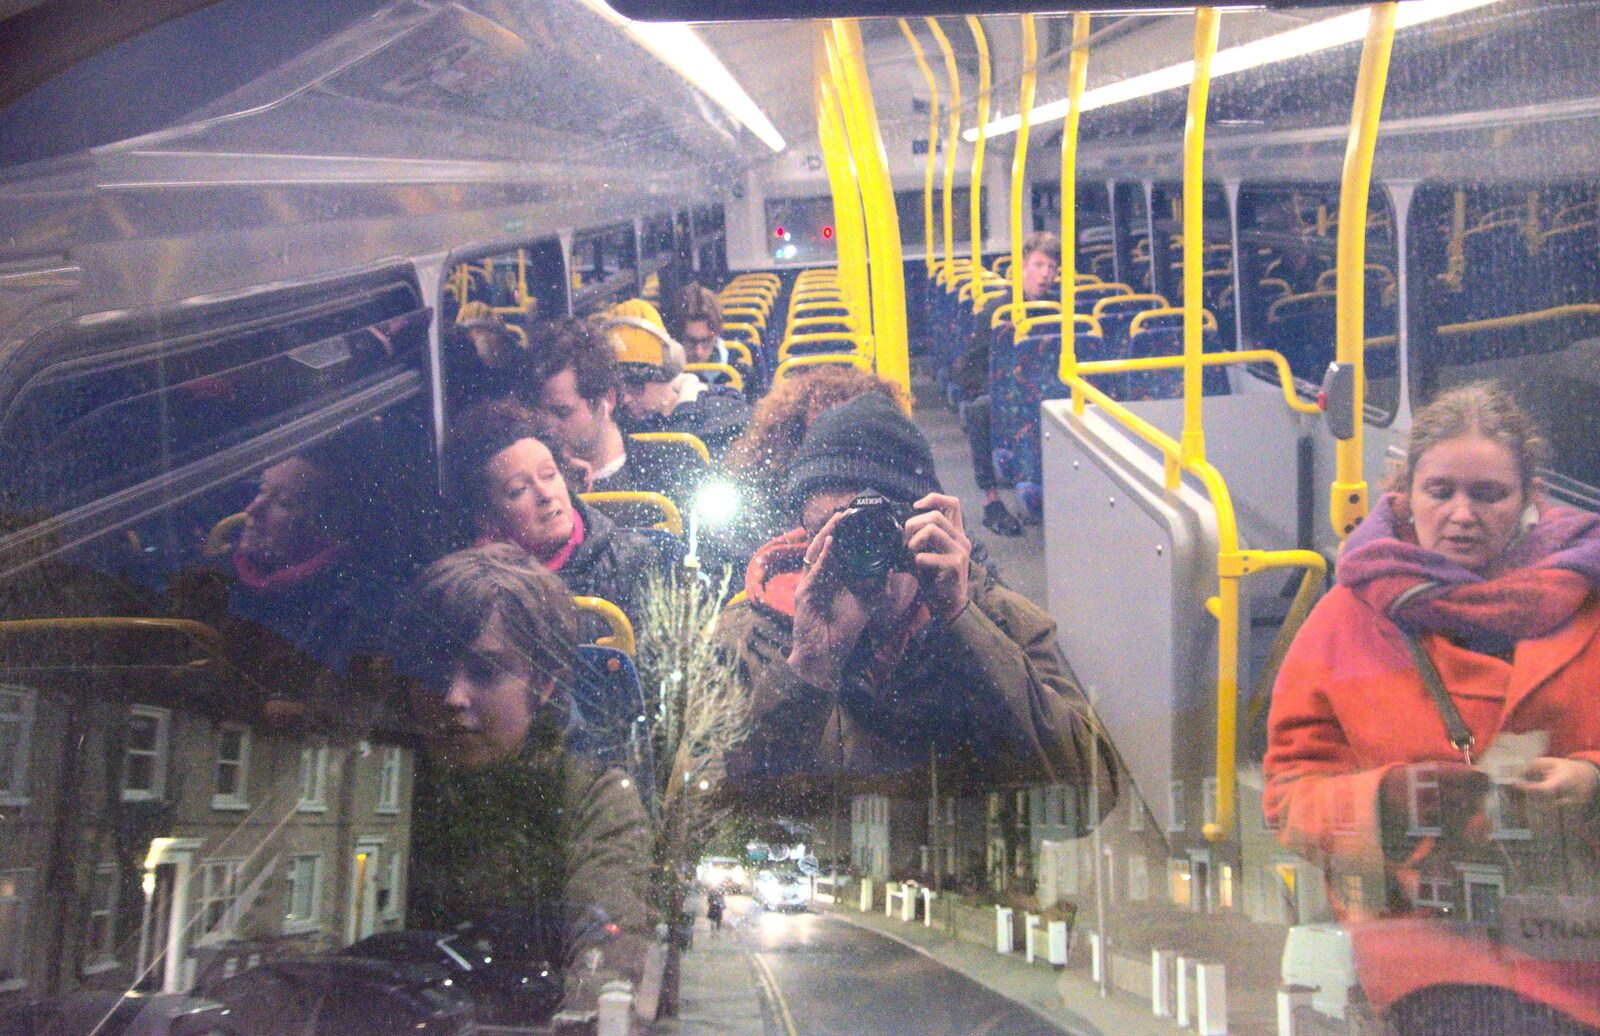 Blackrock North and Newgrange, County Louth, Ireland - 16th February 2023: A selfie from the reflection in the bus window